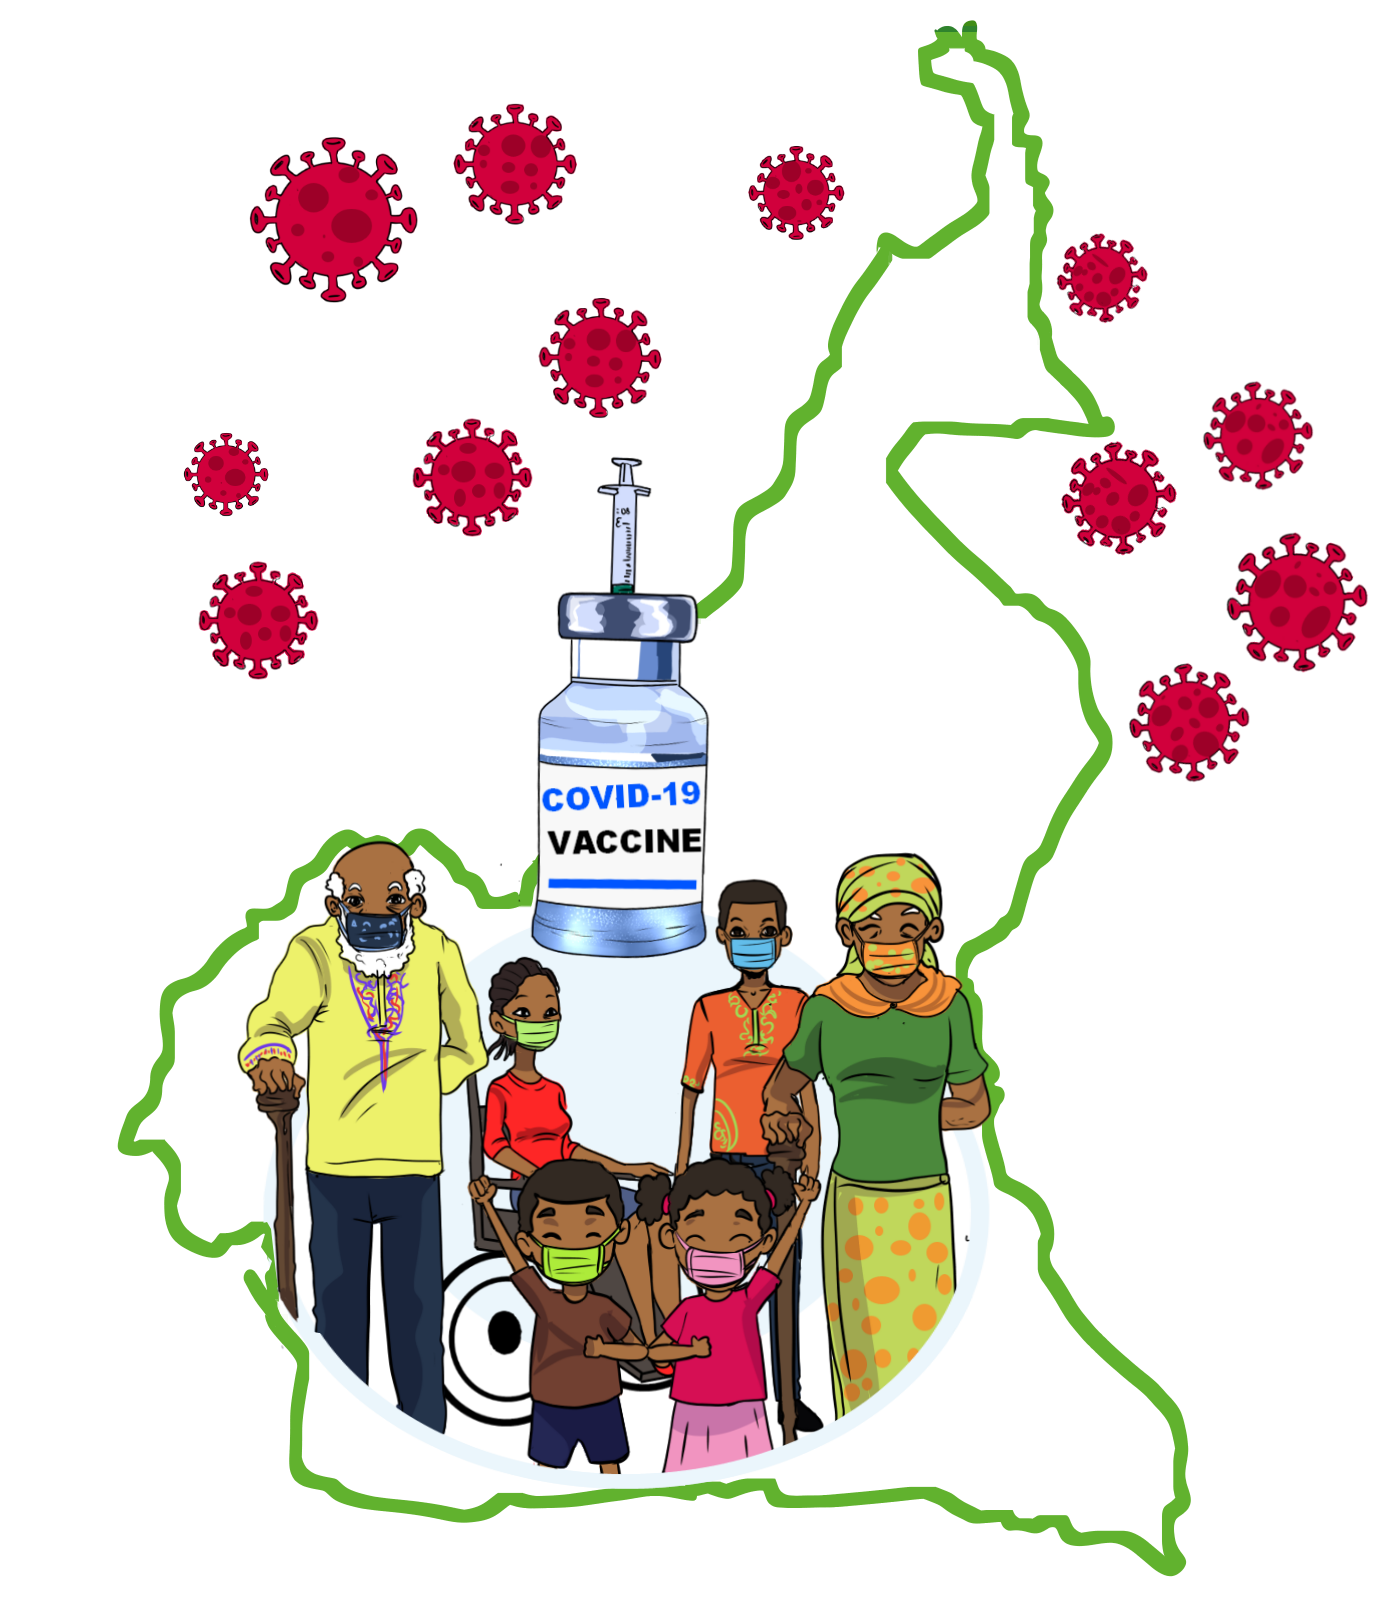 As around 27,000 people are affected by coronavirus disease in Cameroon and the epidemic affects the working population more and causes the most deaths among people over 40,